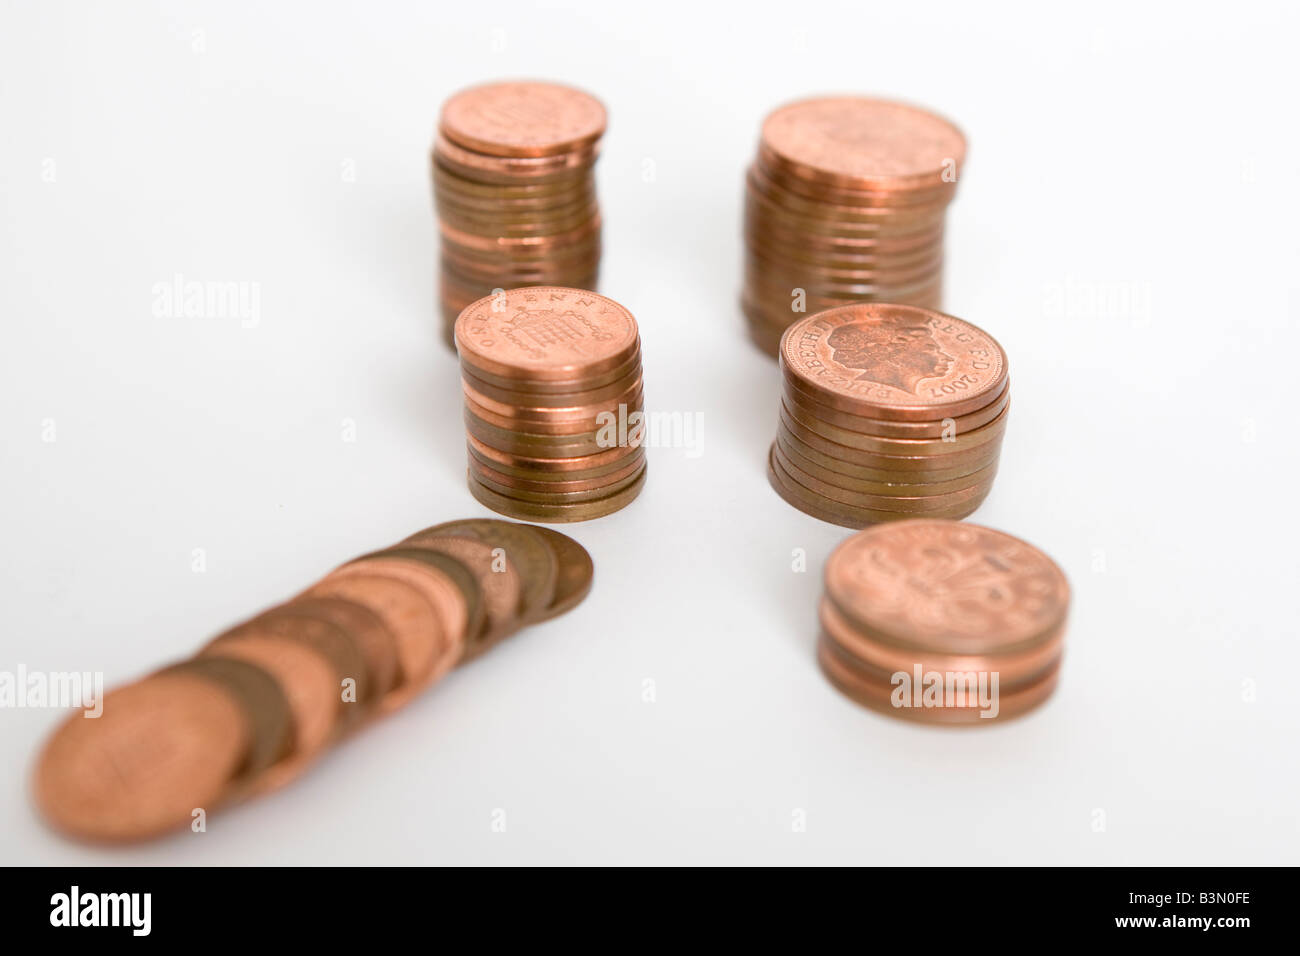 6 piles of 1 pence pieces or copper pennies Stock Photo